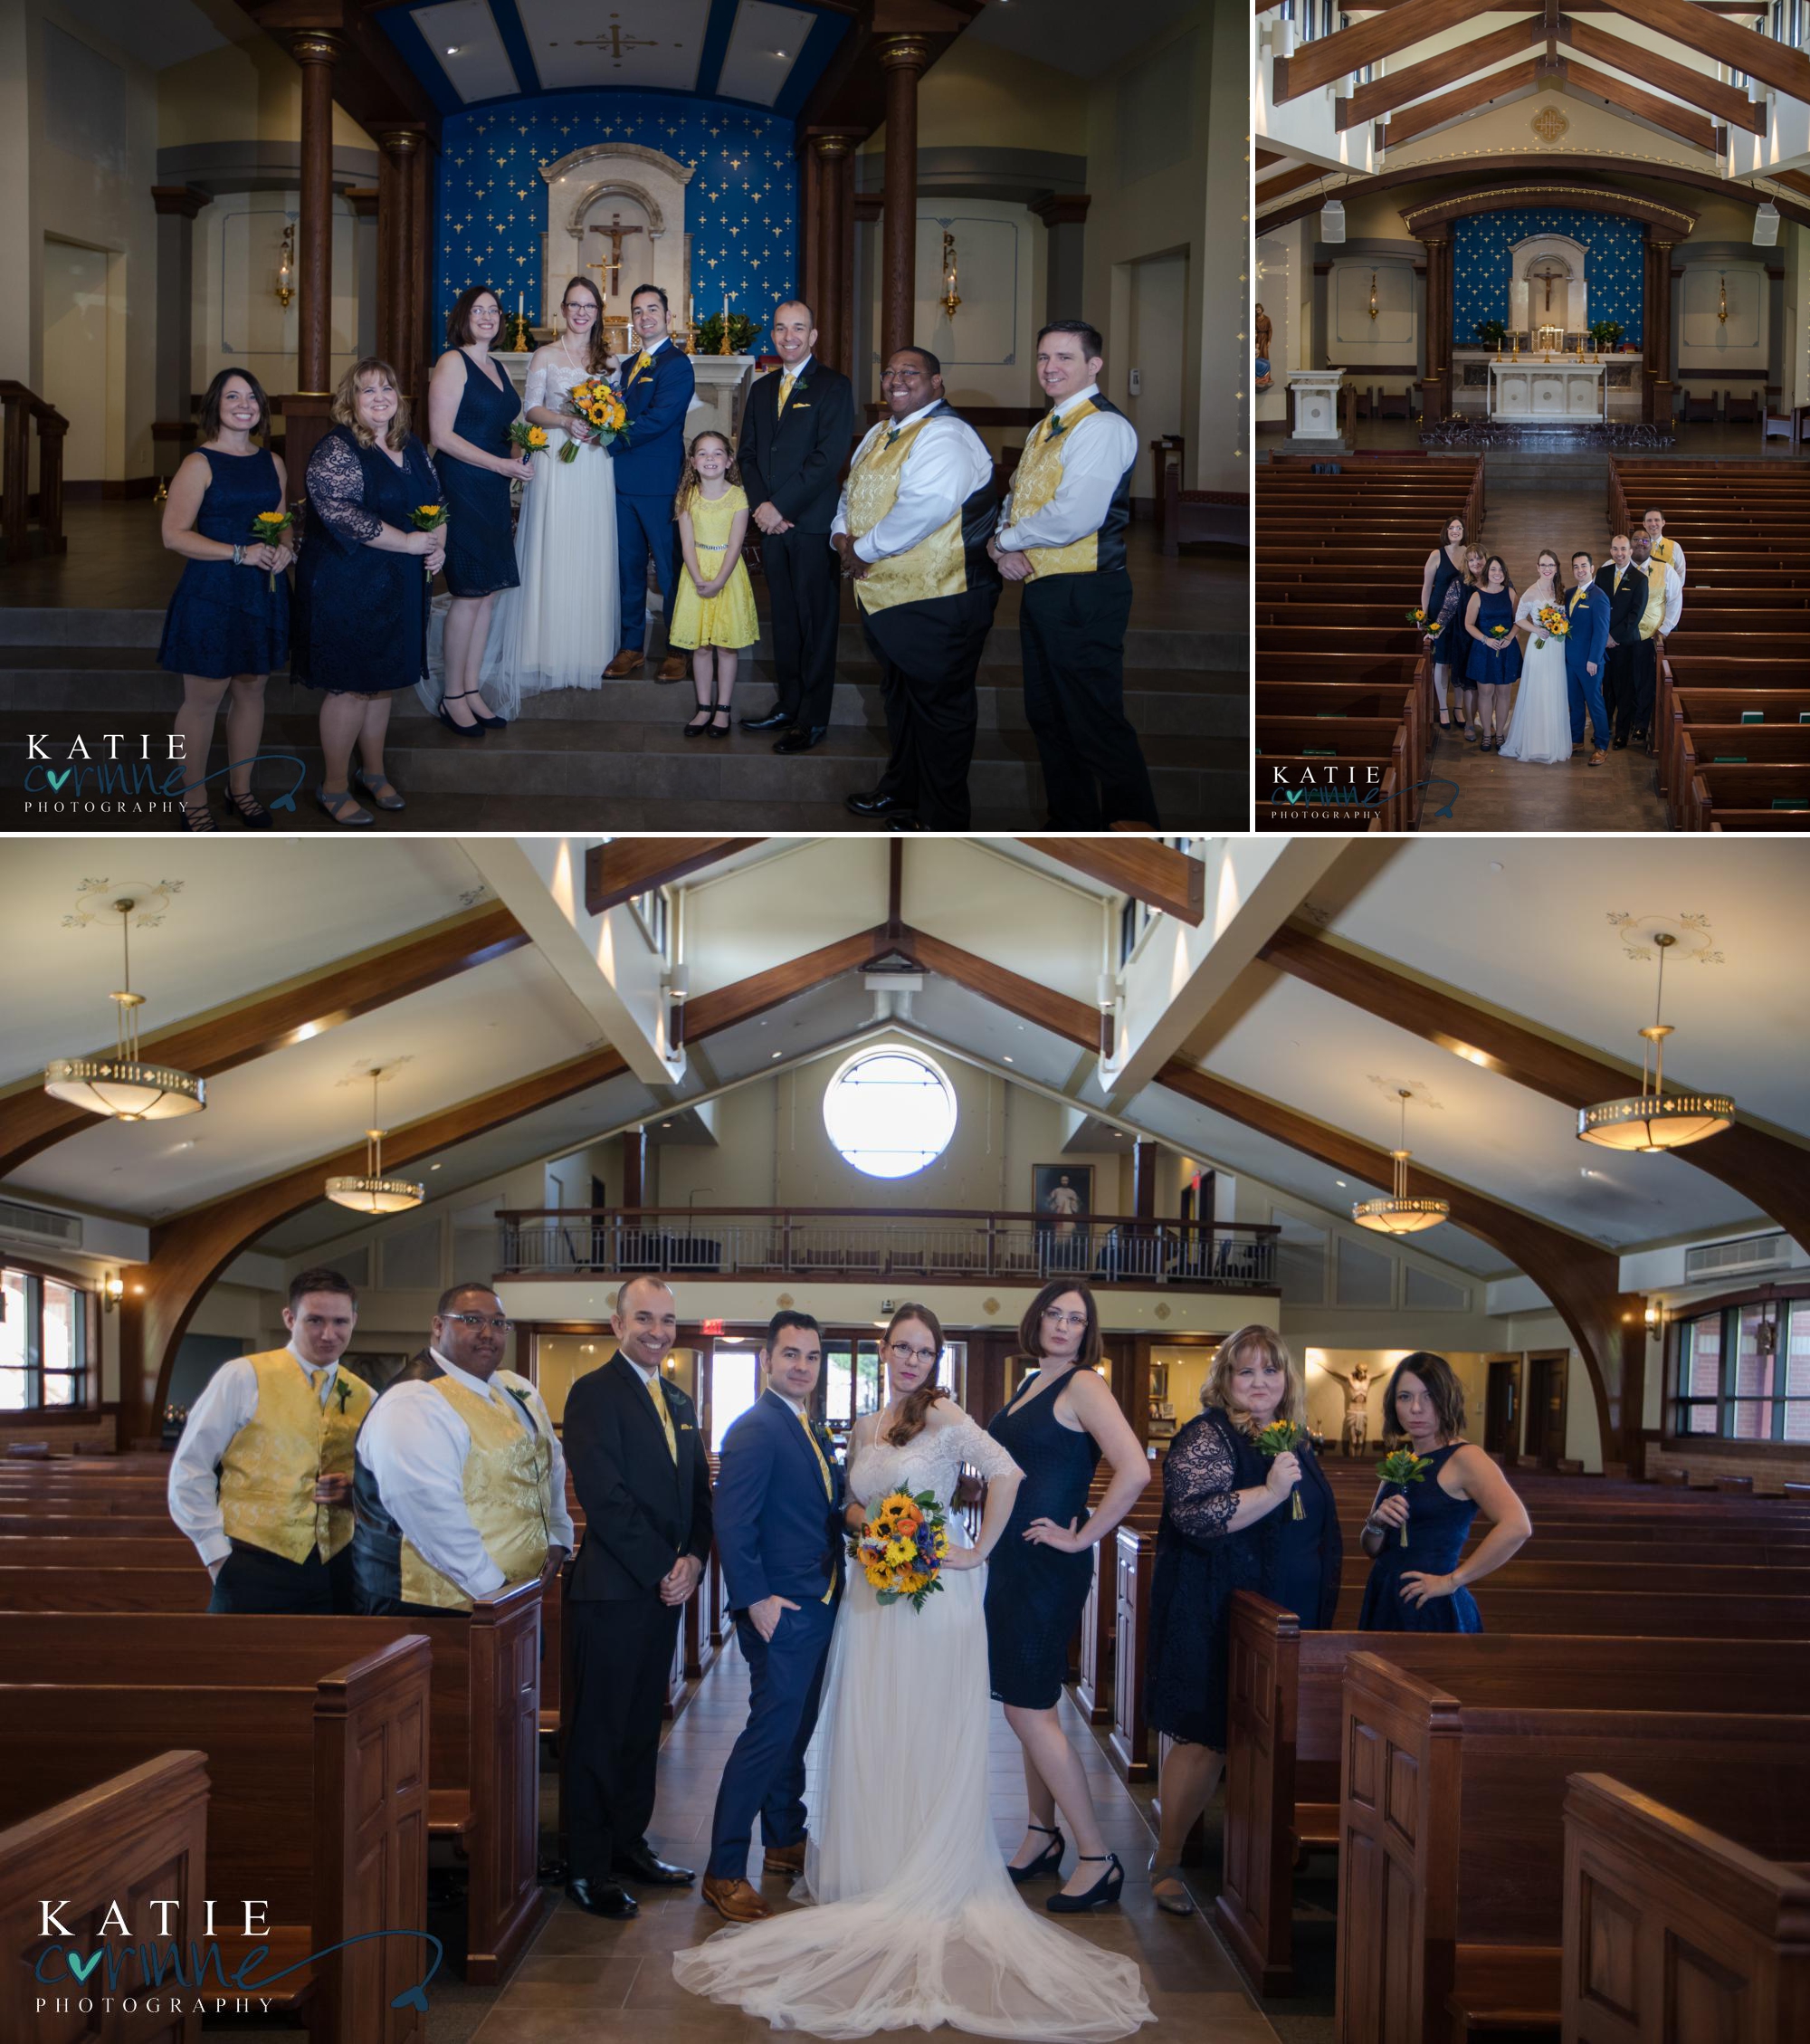 Family formal portraits in Westminter Colorado church